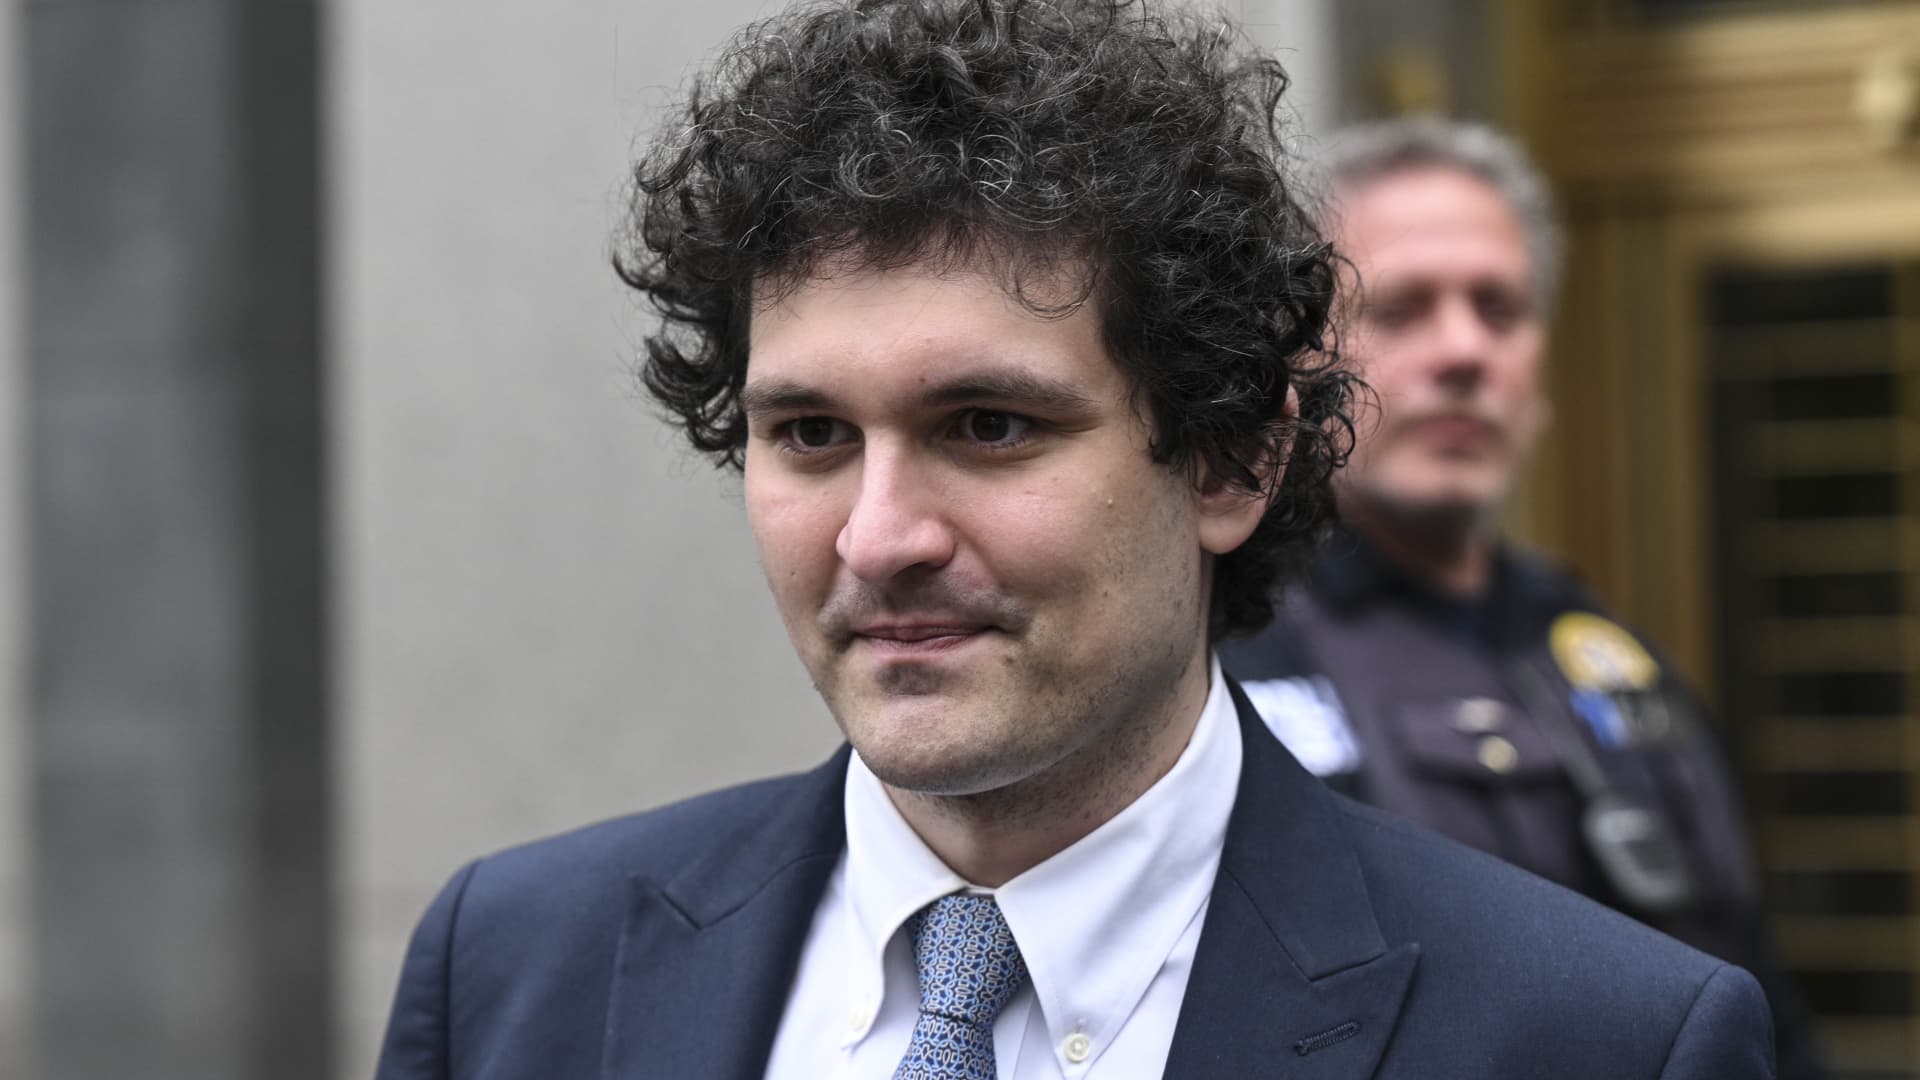 Sam Bankman-Fried's lawyer demands he gets Adderall for ADHD while in jail